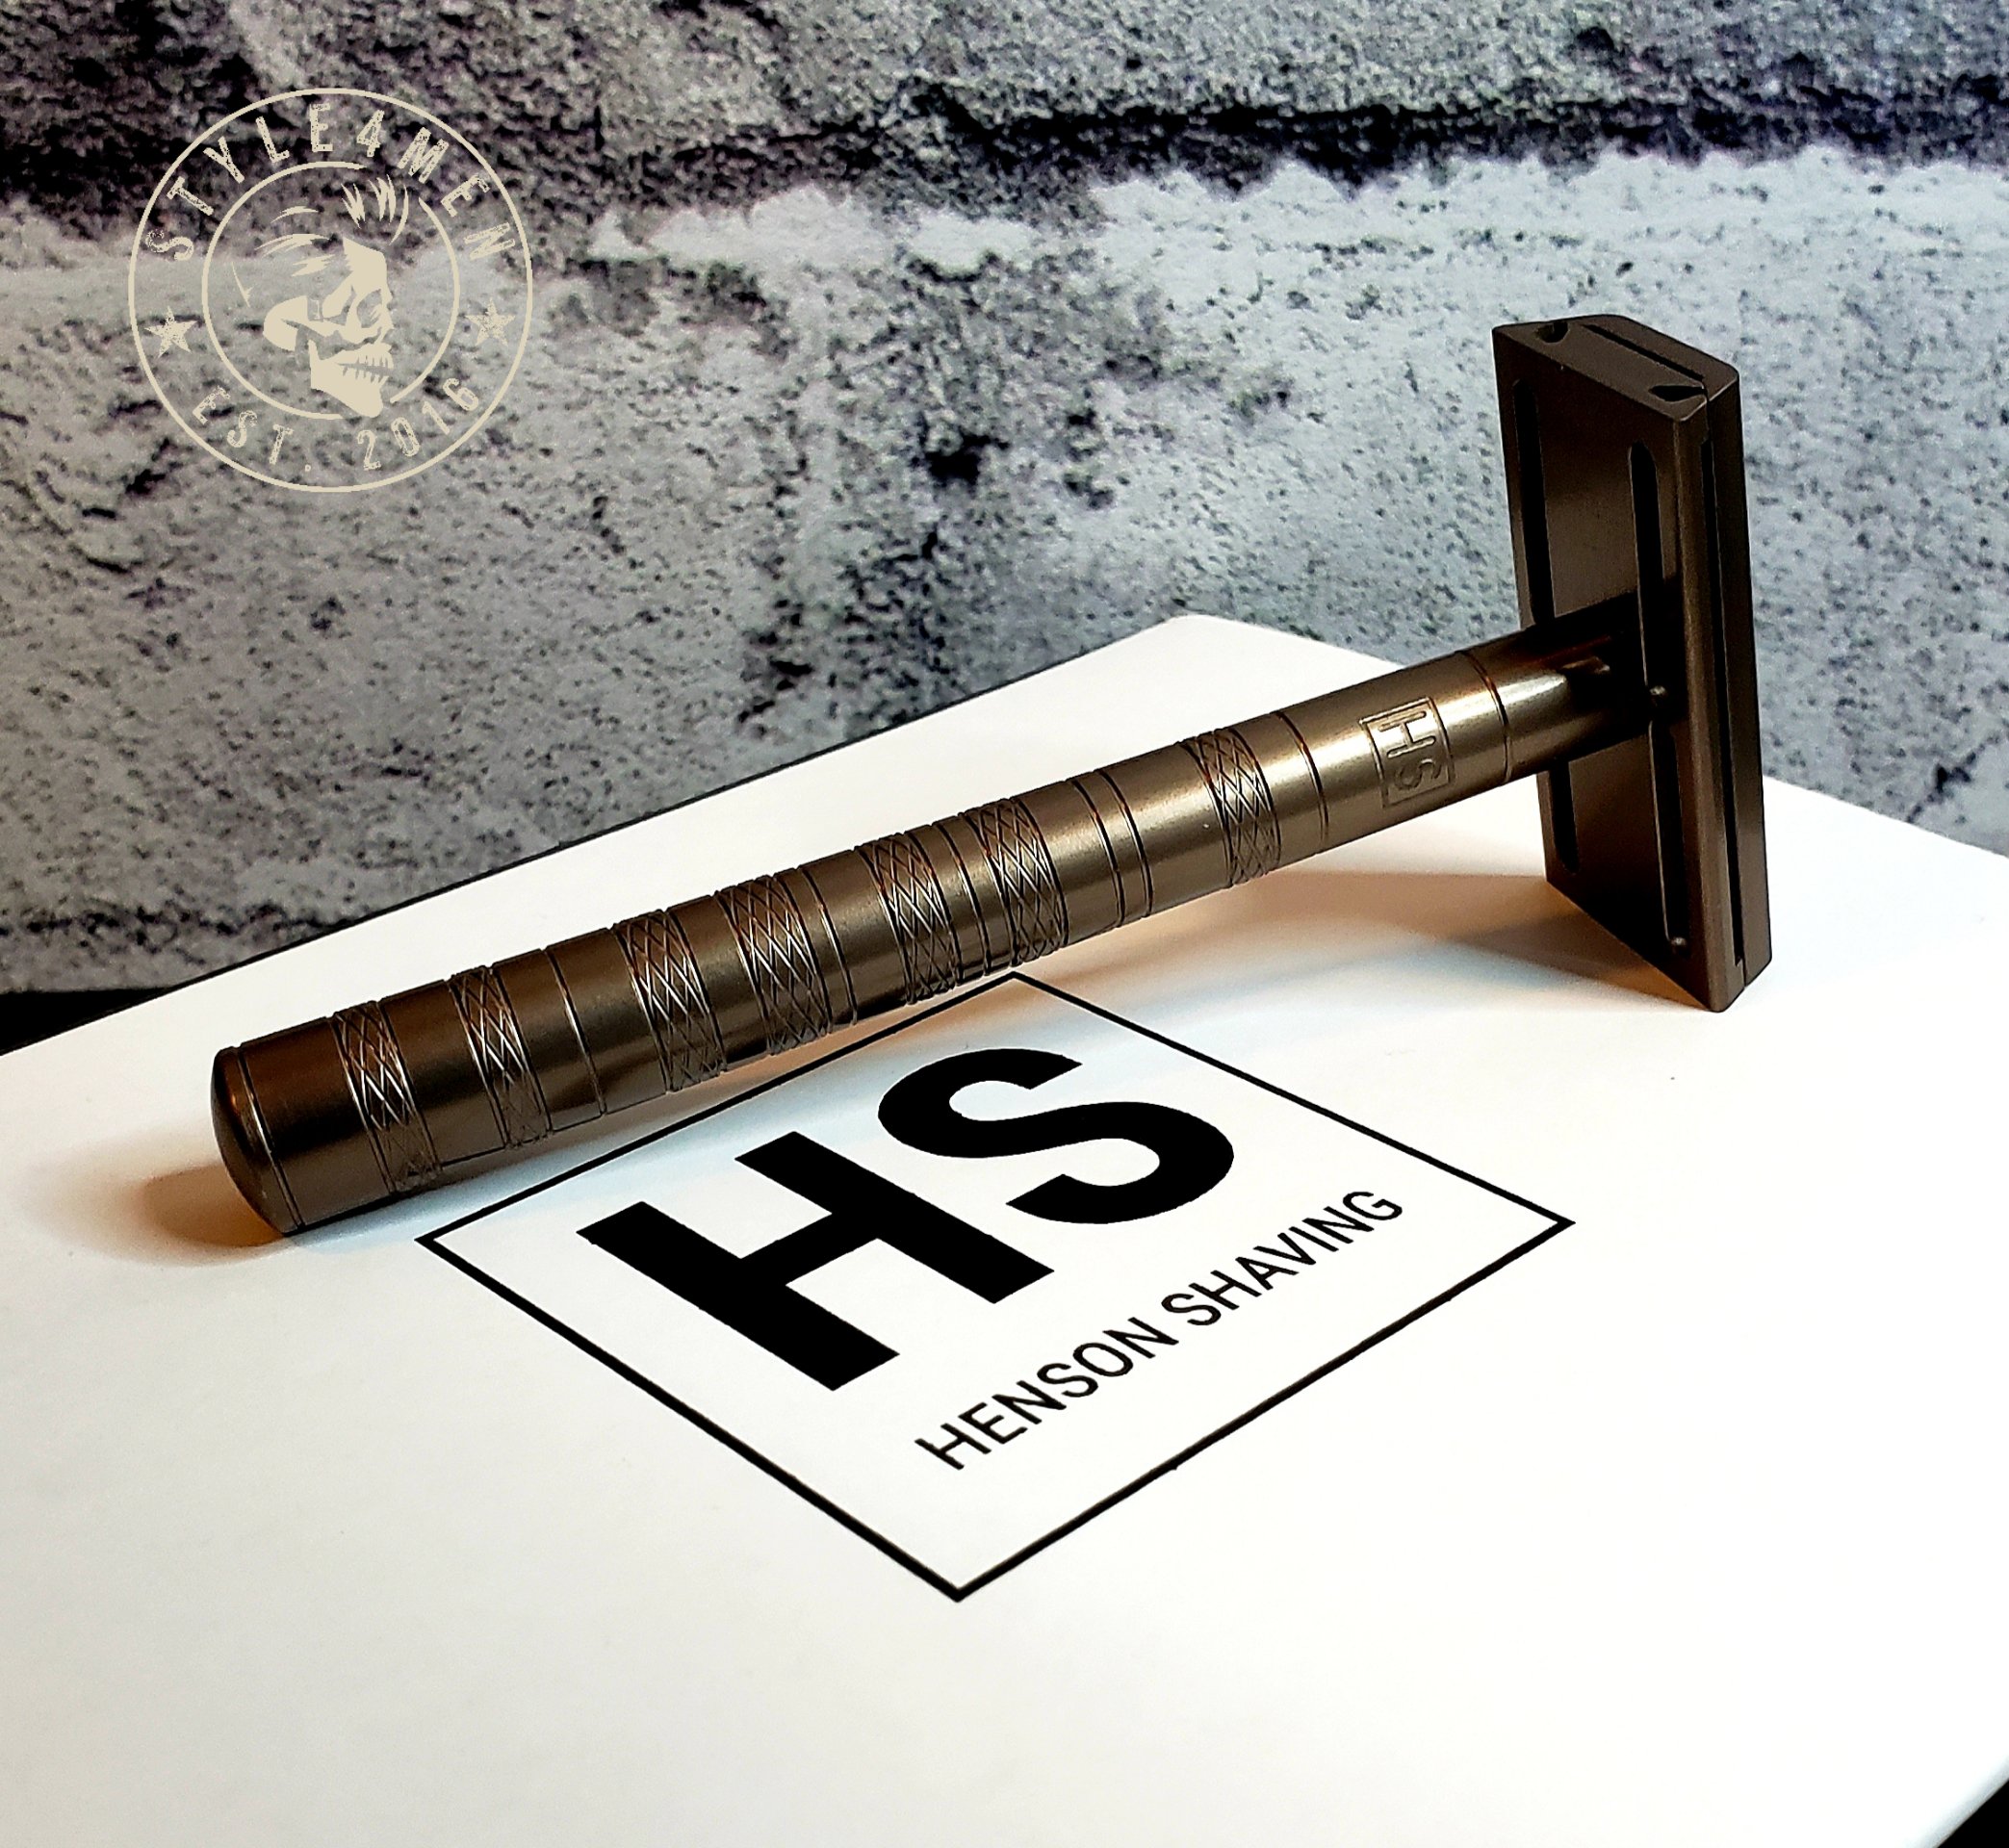 Henson Shaving created a safety razor for the 21st century